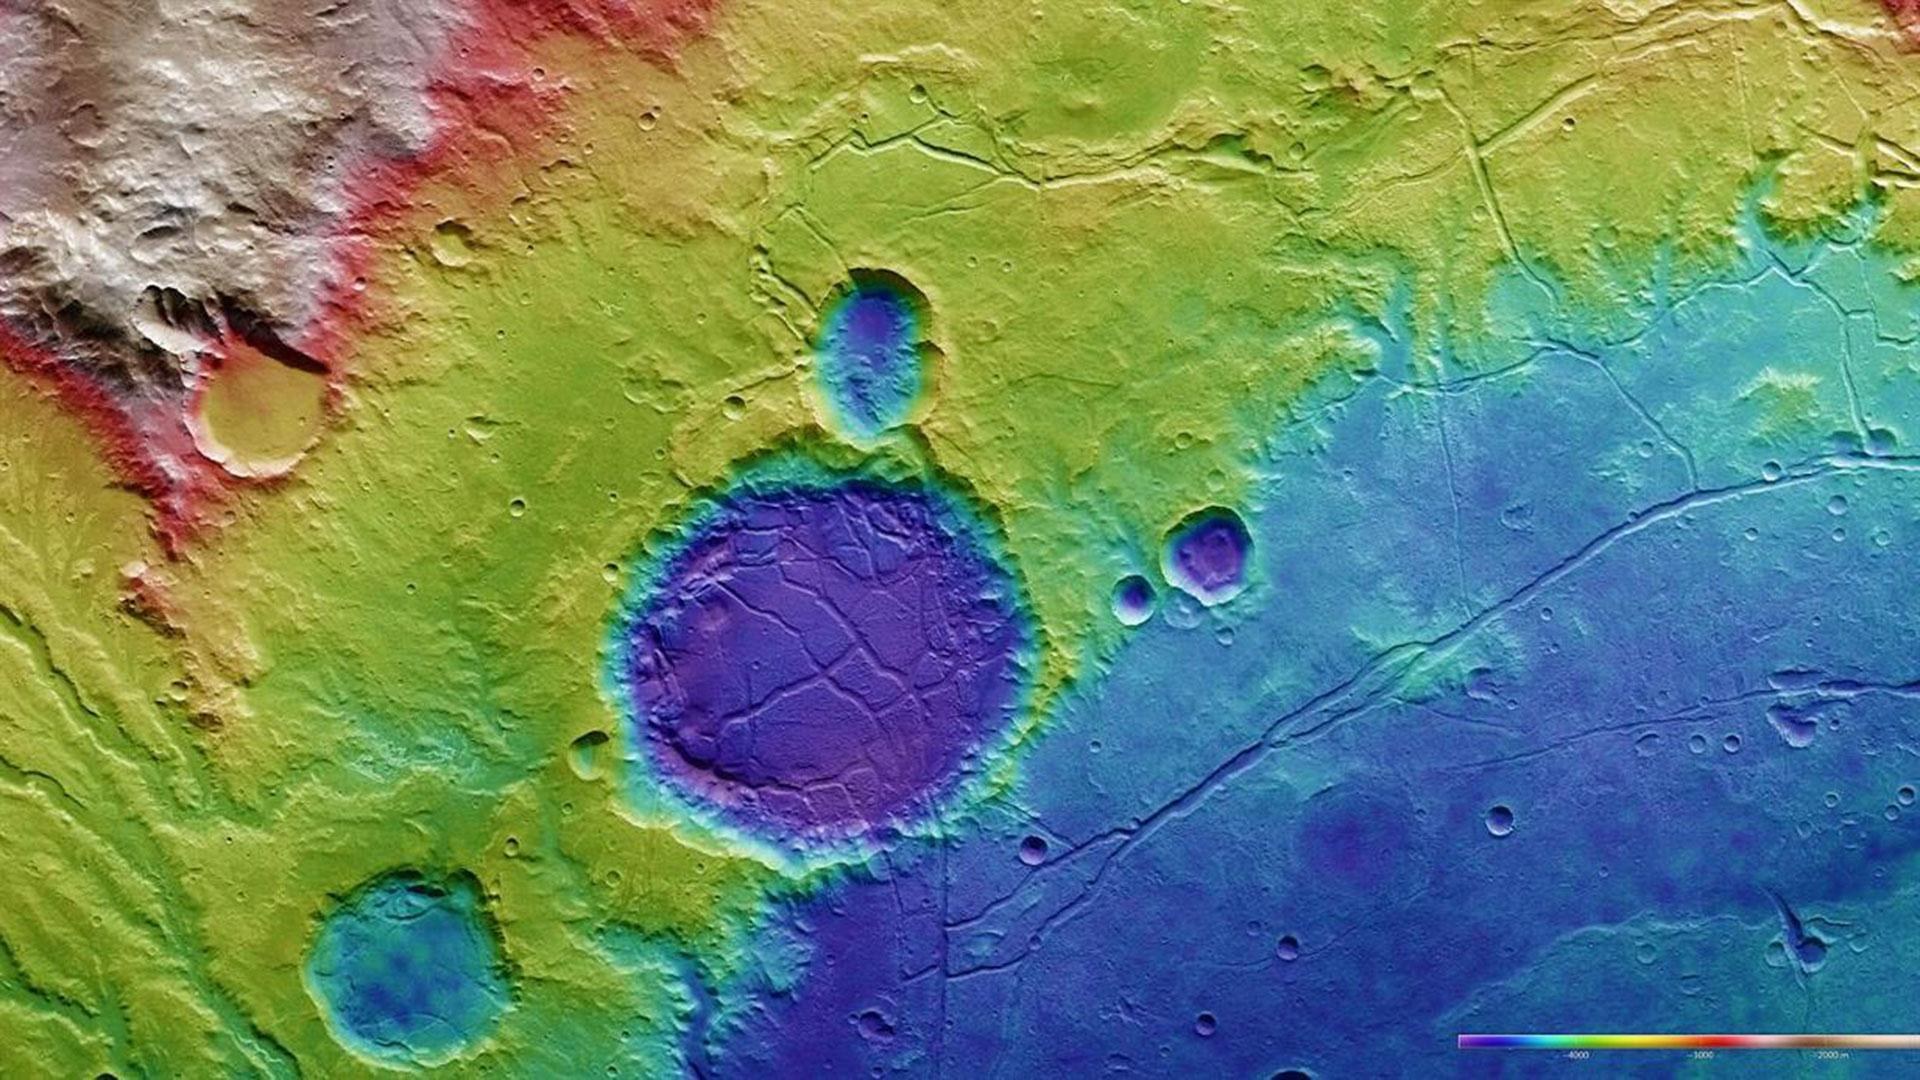 Colour-coded image of the topography of the western part of Arda Valles